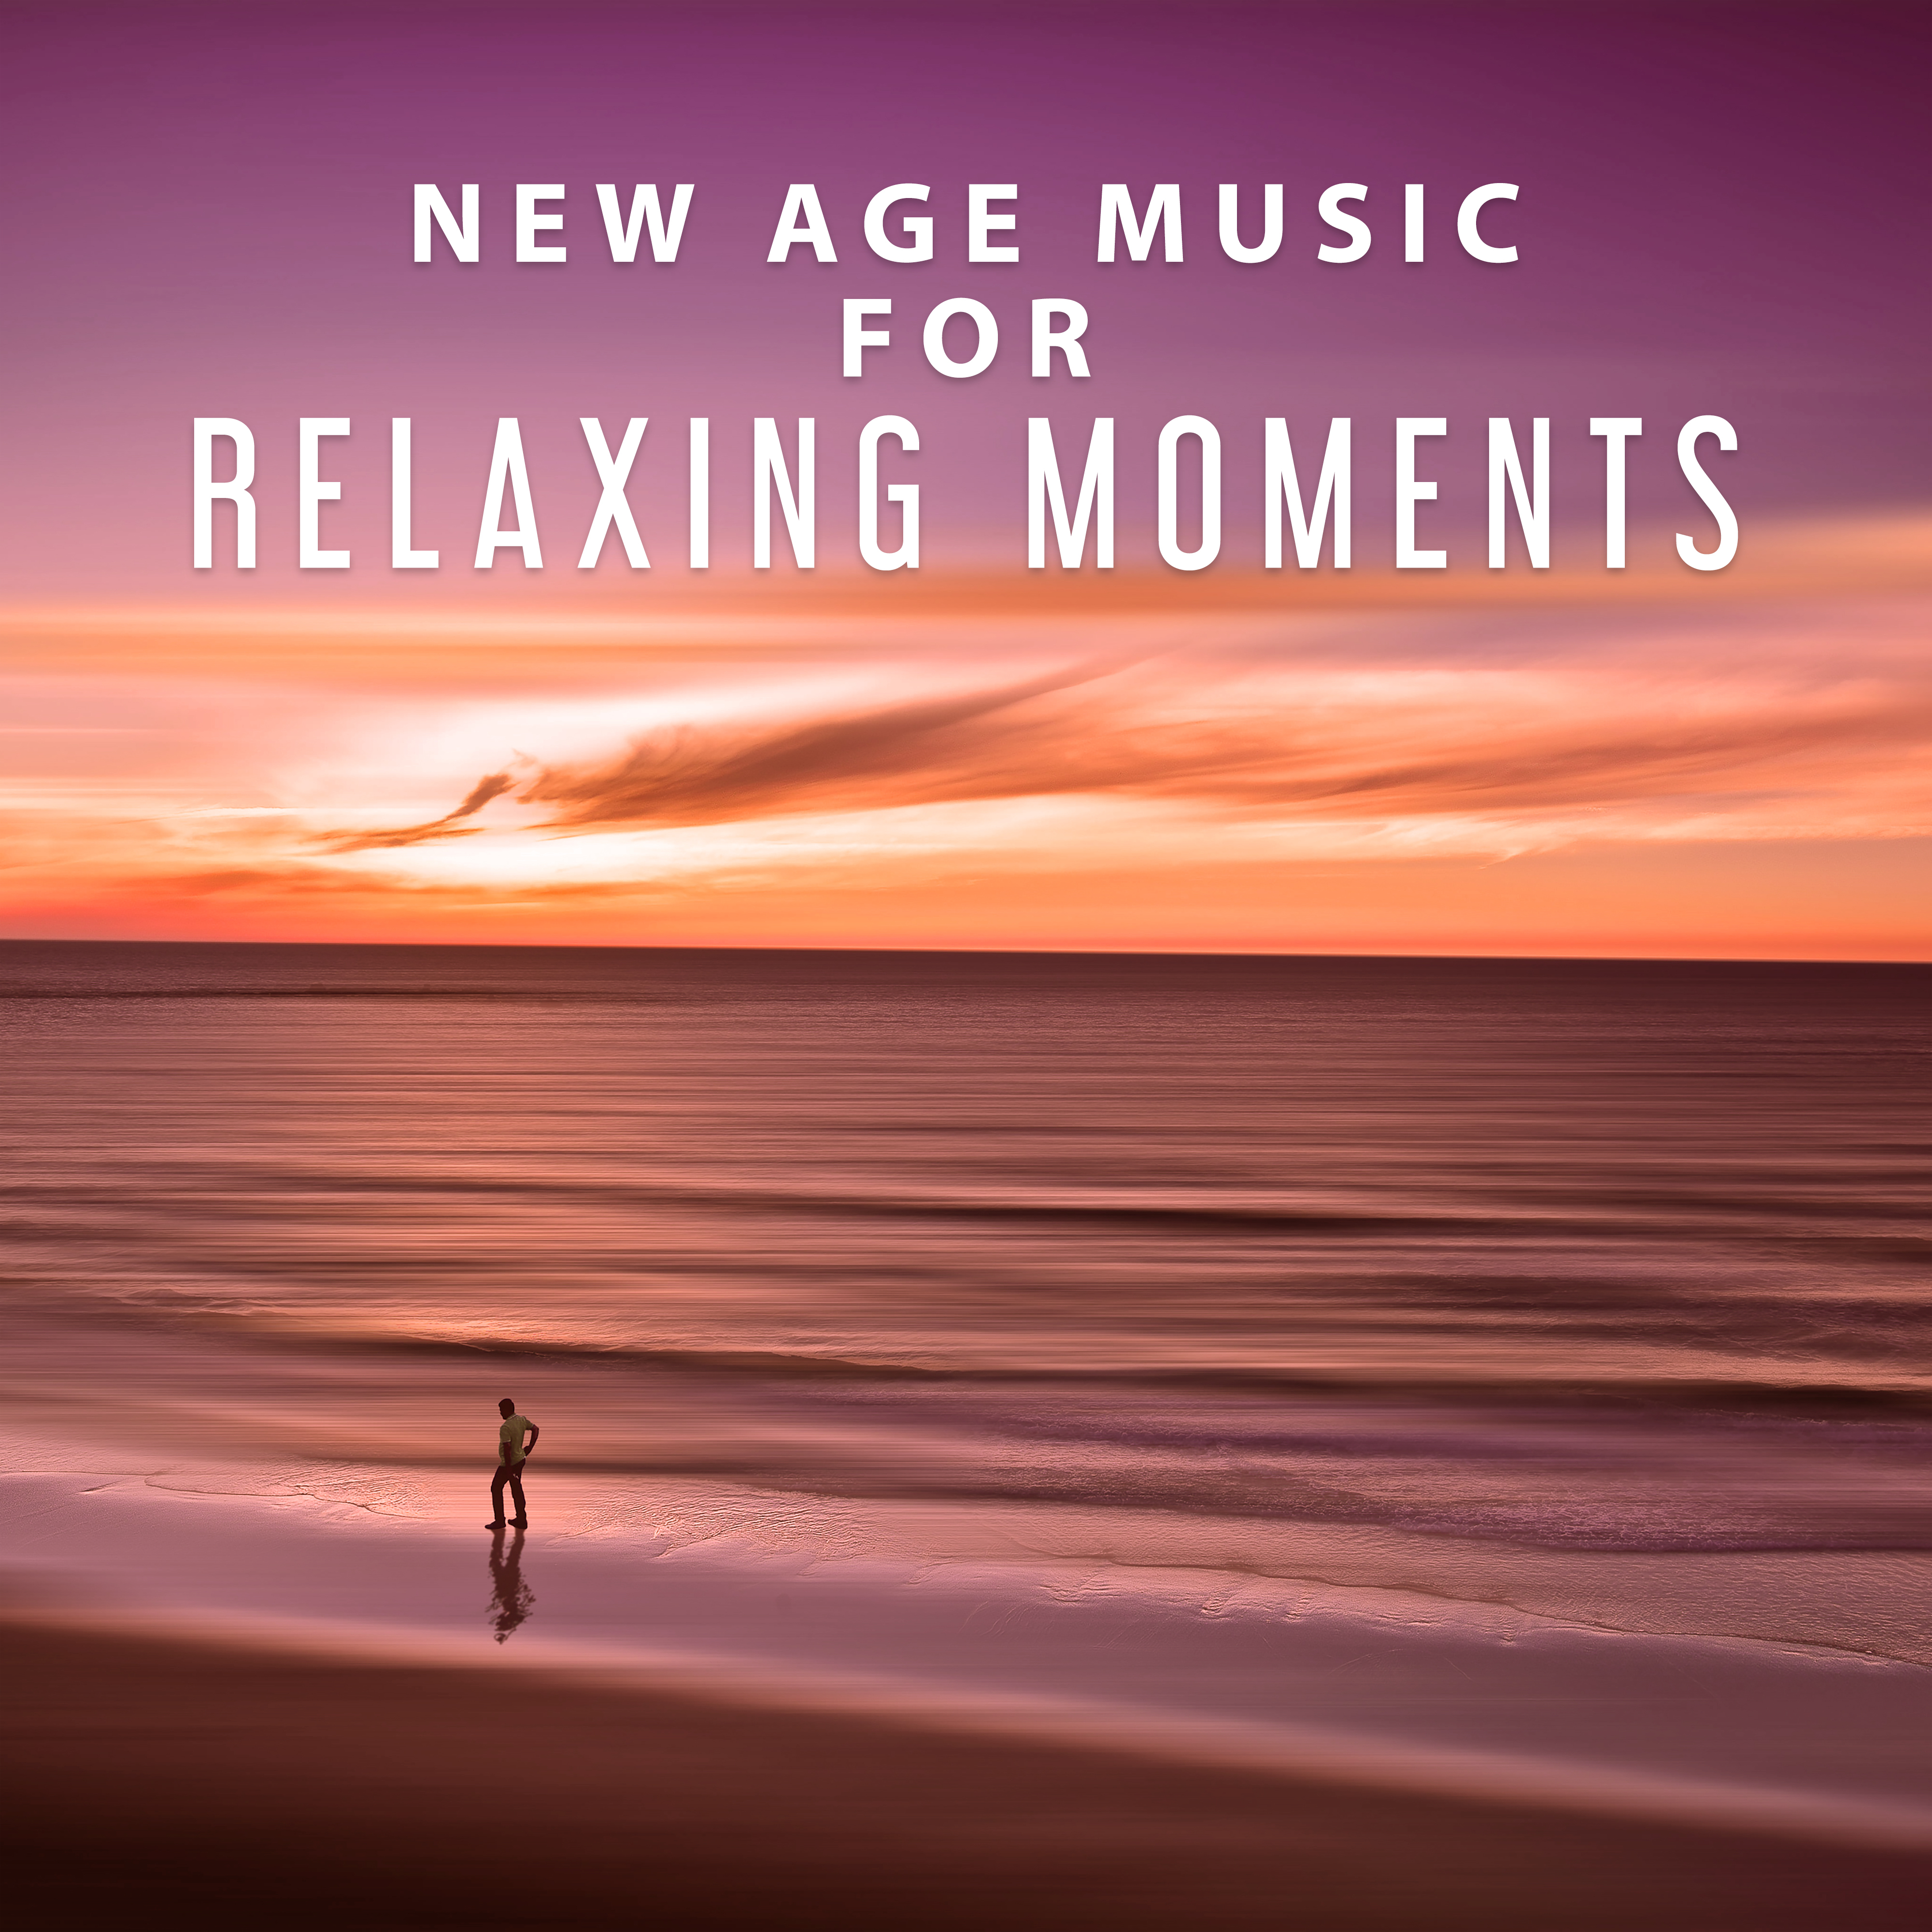 New Age Music for Relaxing Moments  Rest  Relax, Soothing New Age Sounds, Mind Free, Spirit Calmness, Inner Silence